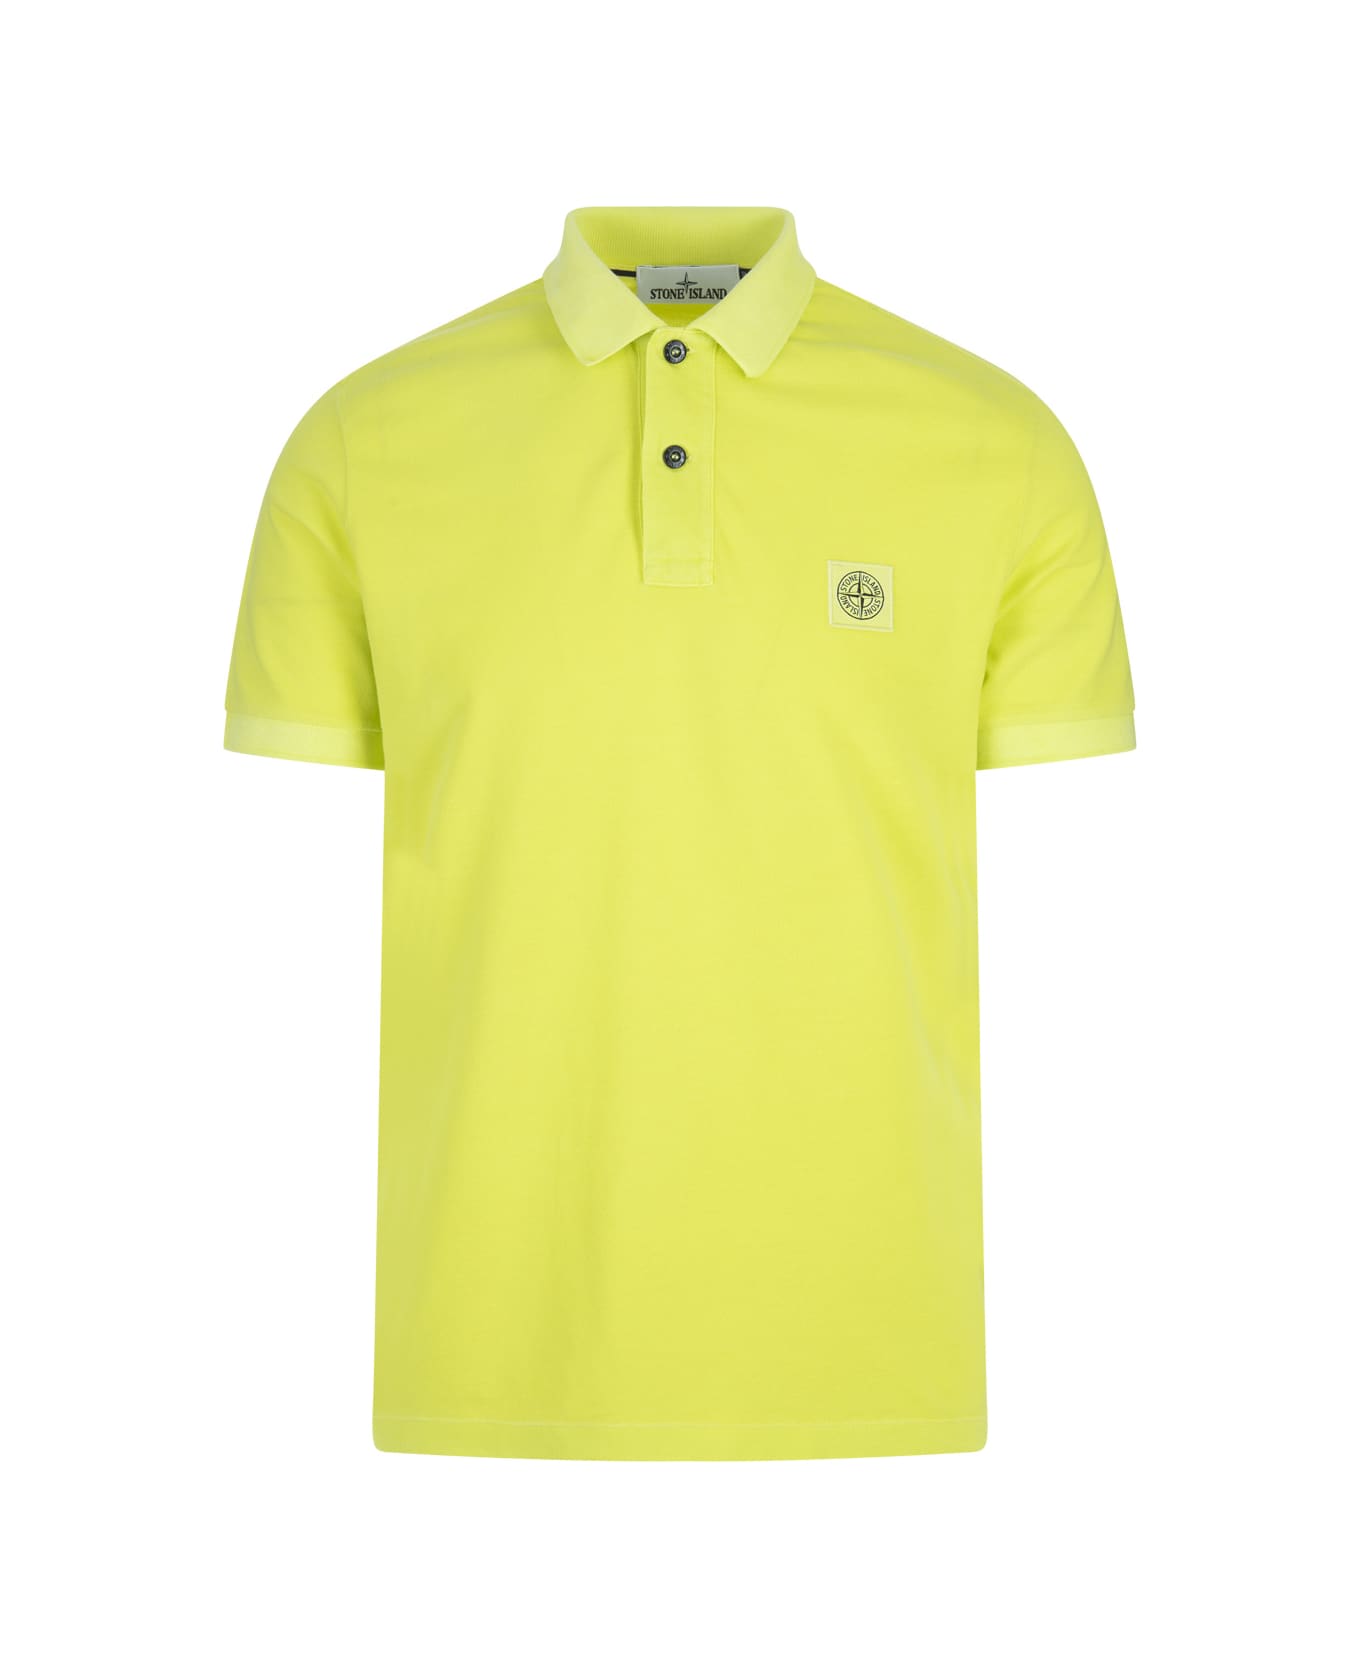 Stone Island Yellow Pigment Dyed Slim Fit Polo Shirt - Yellow